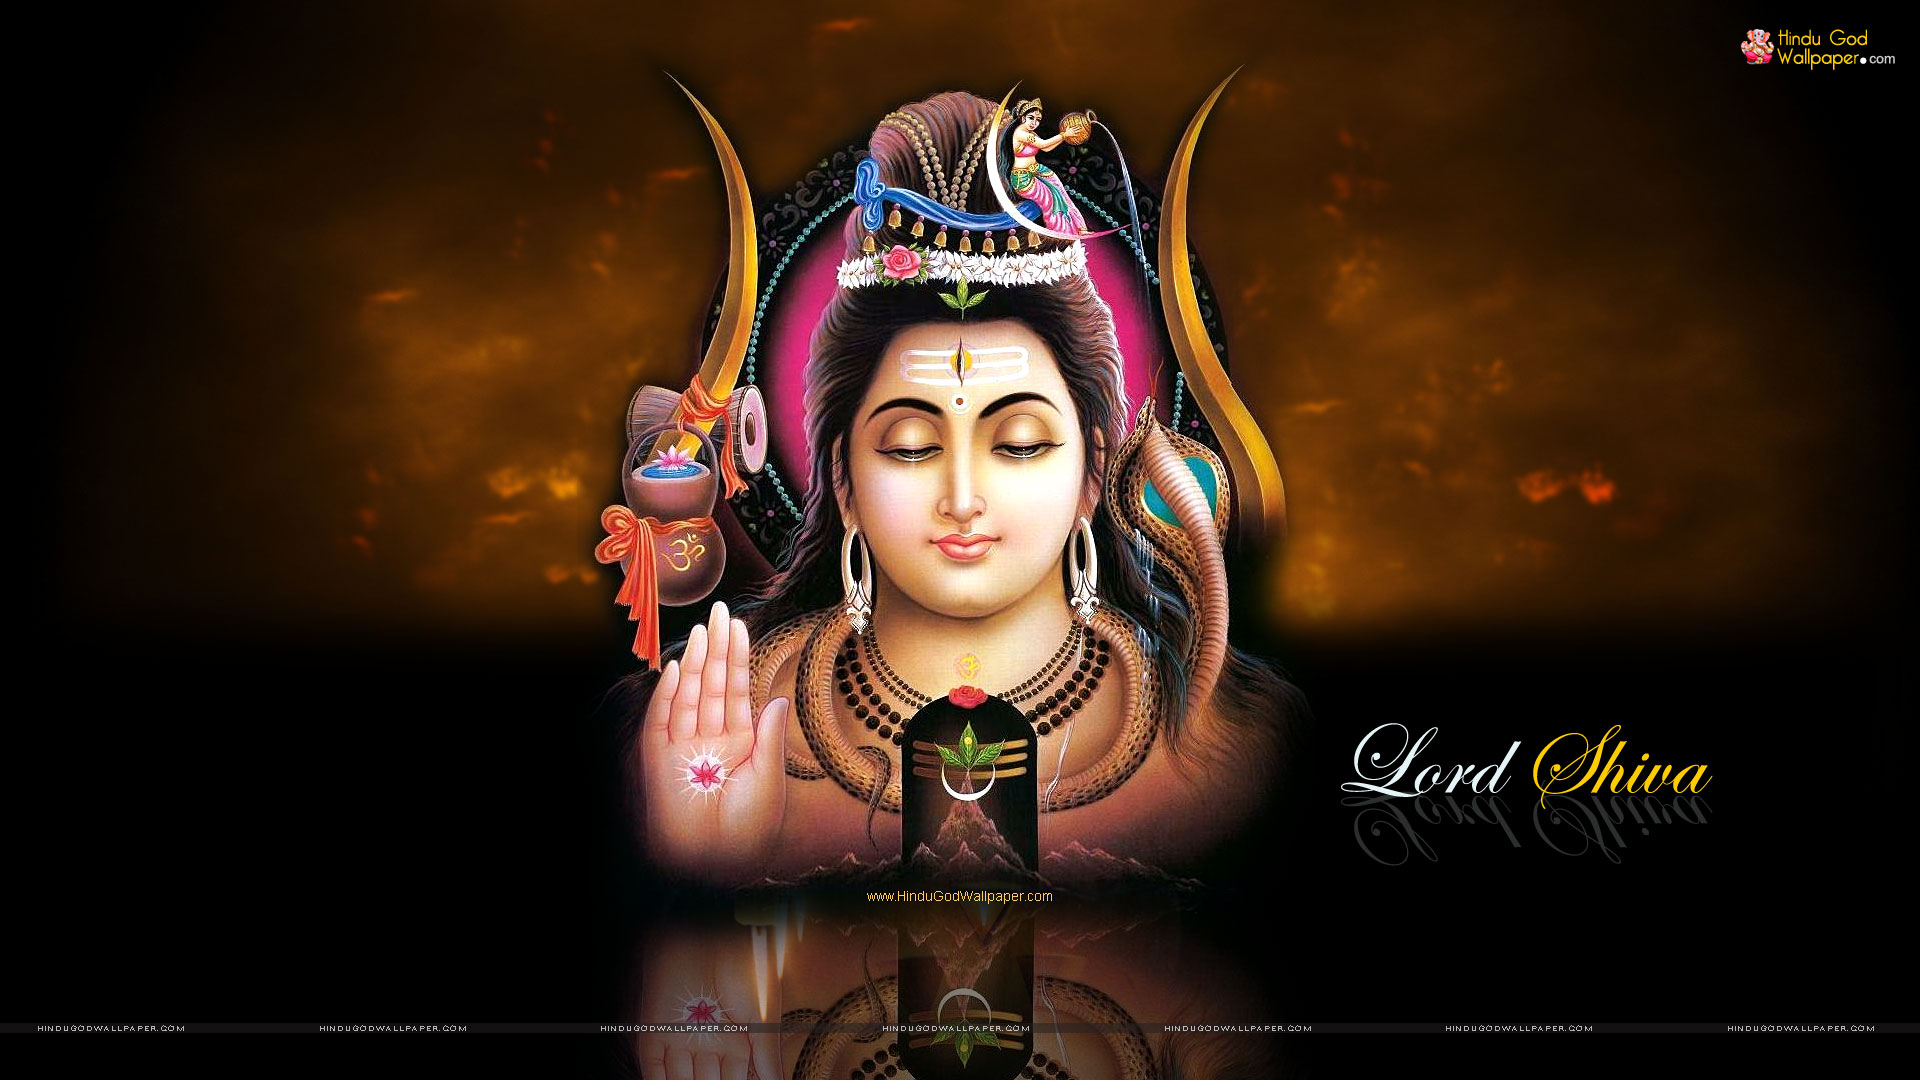 Lord Shiva HD Wallpapers Free Download for Desktop